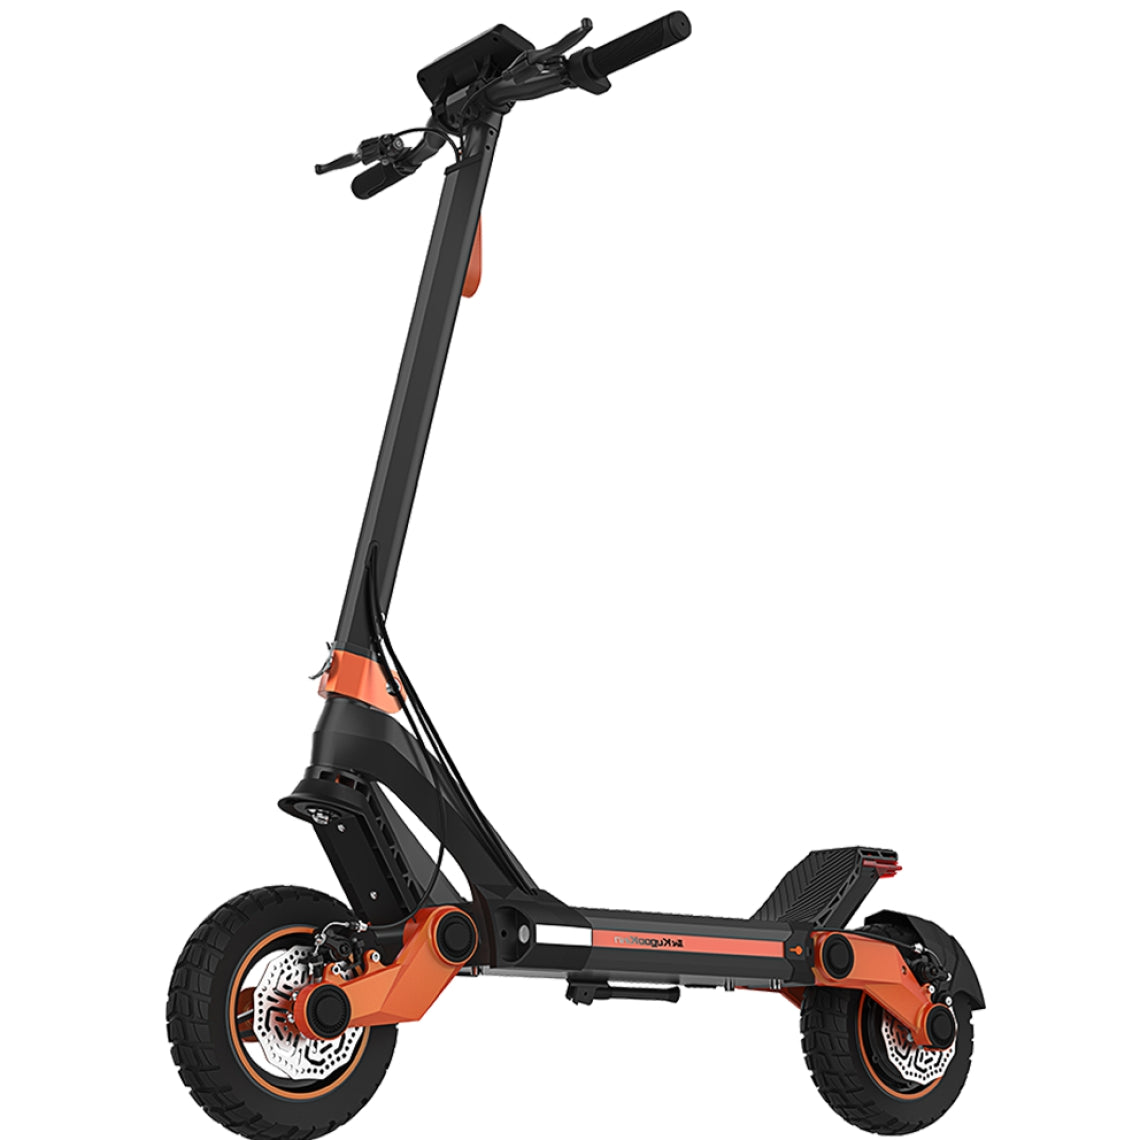 KugooKirin G3 Electric Scooter,Powerful 1200W Motor,720Wh Battery